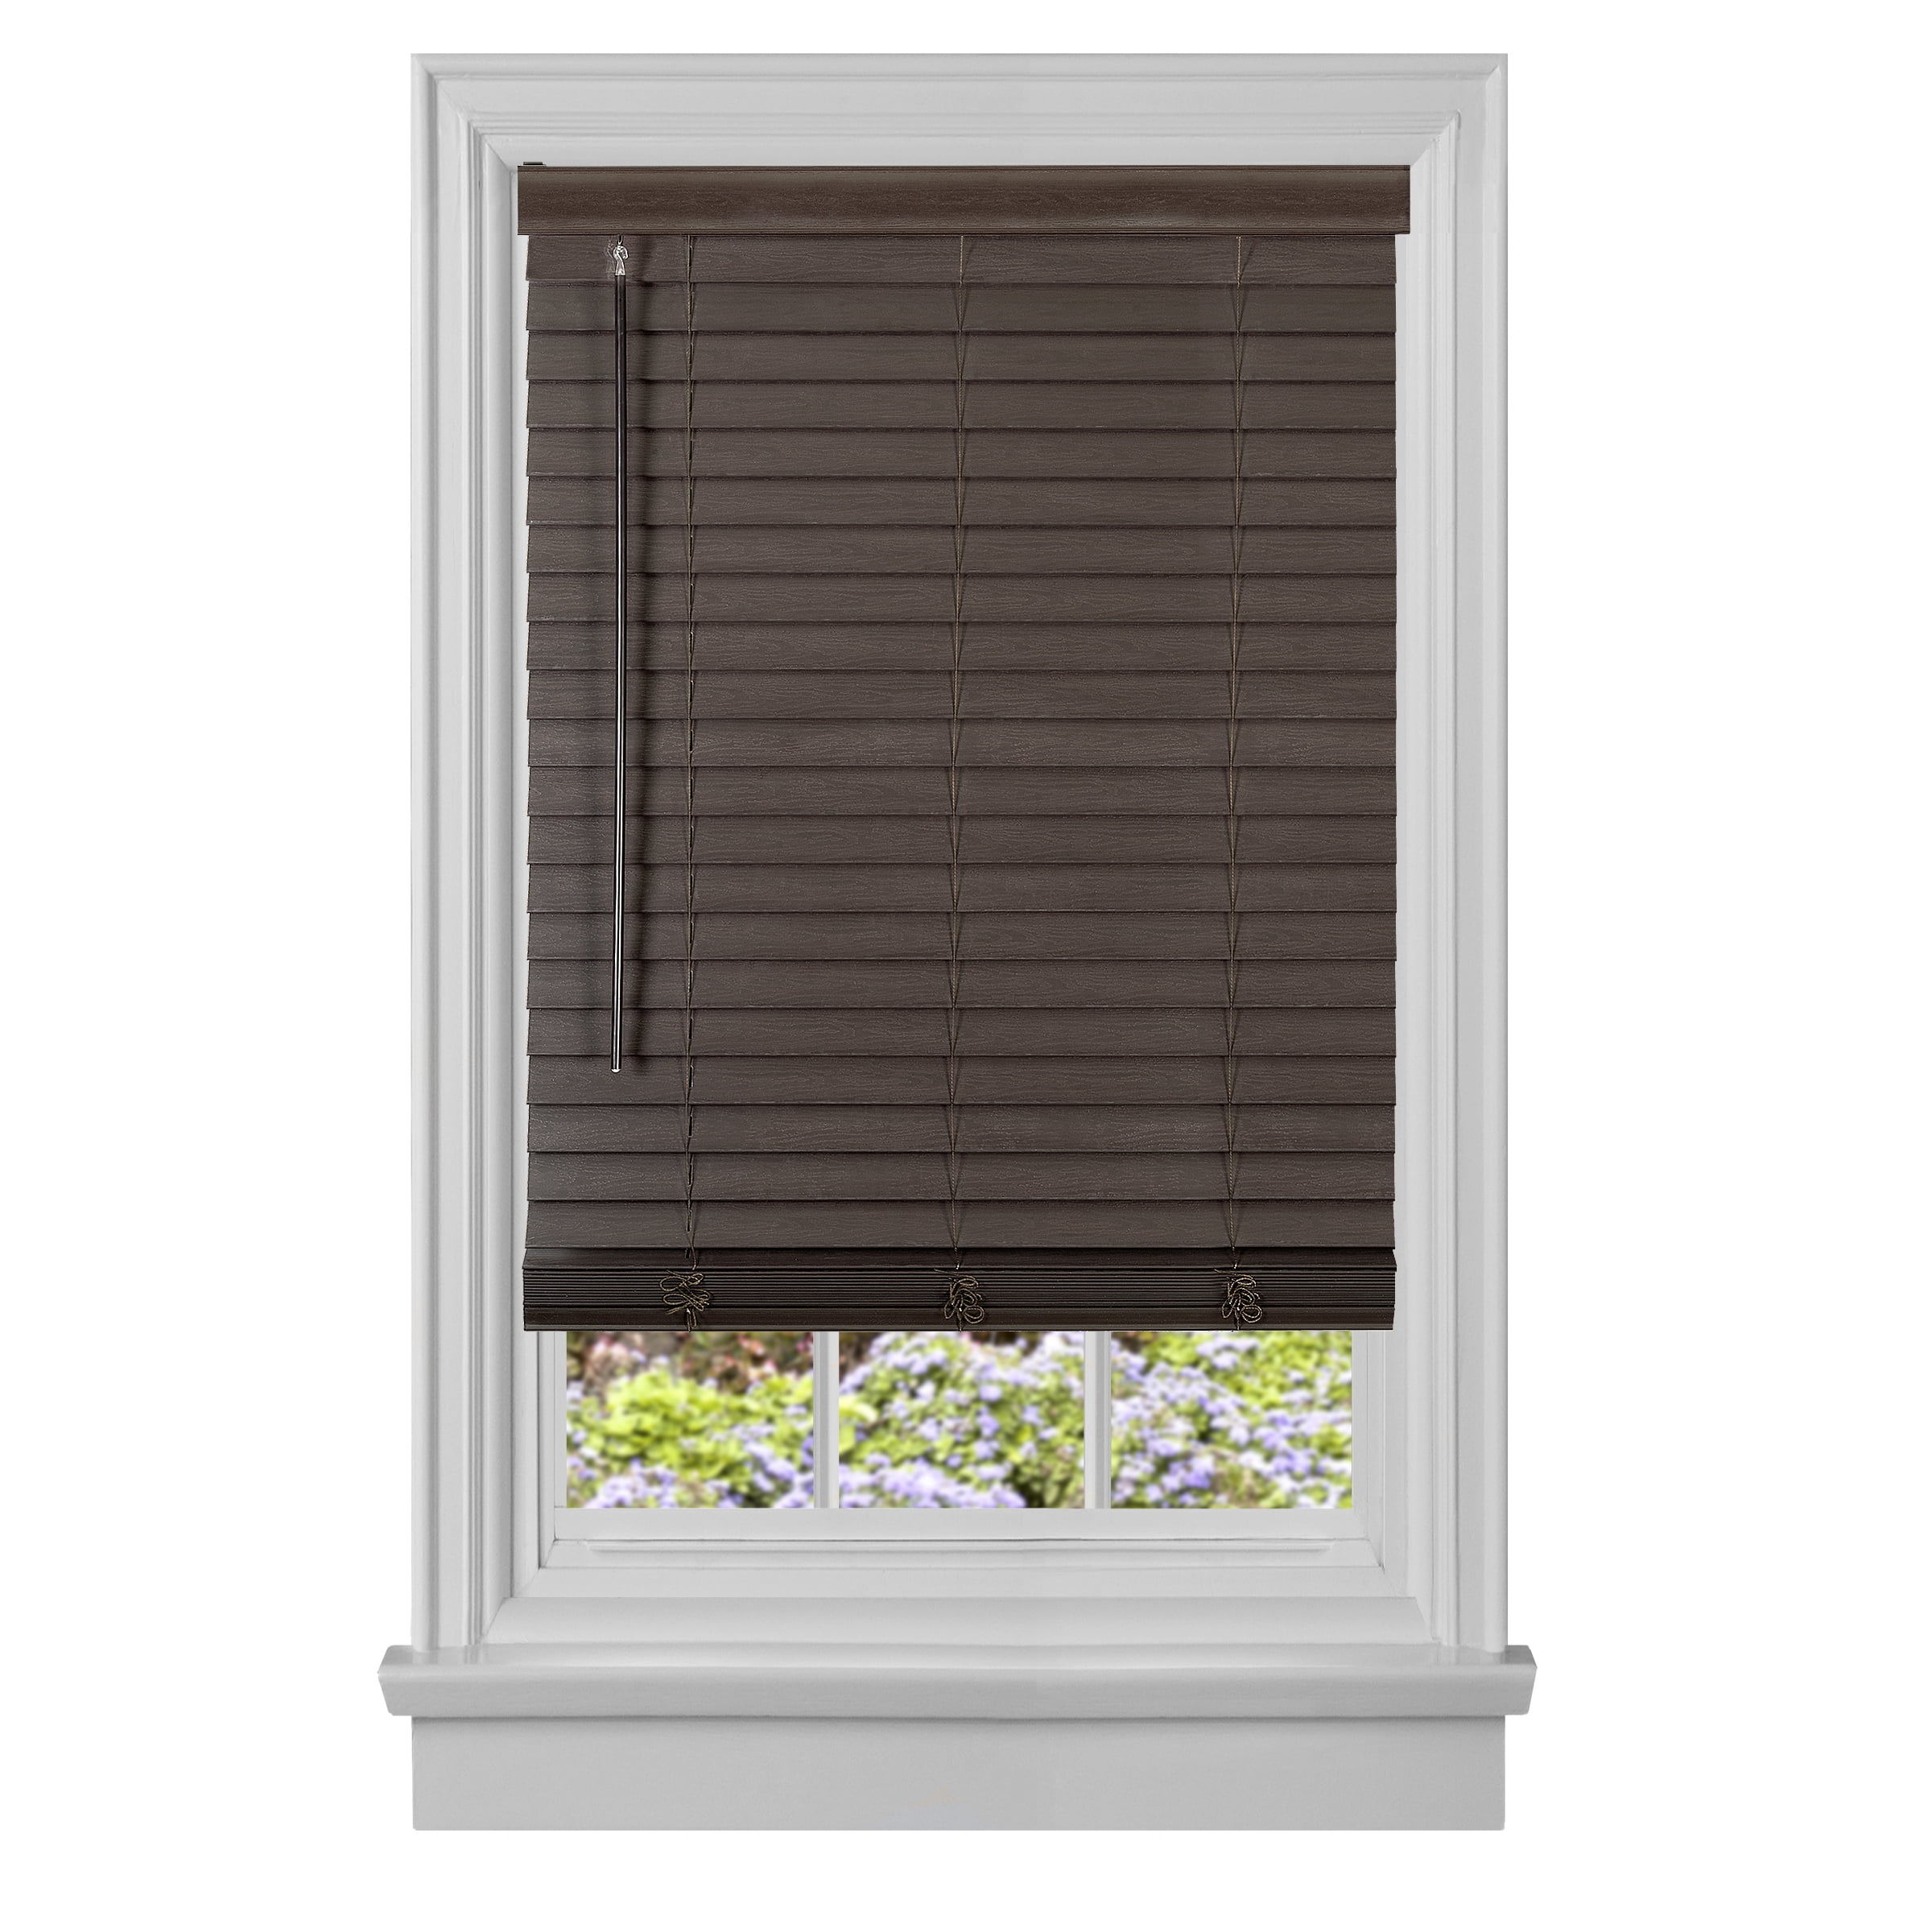 Picture of Achim MFG234MH02 34 x 64 in. Cordless GII Madera Falsa 2 in. Faux Wood Plantation Blind - Mahogany